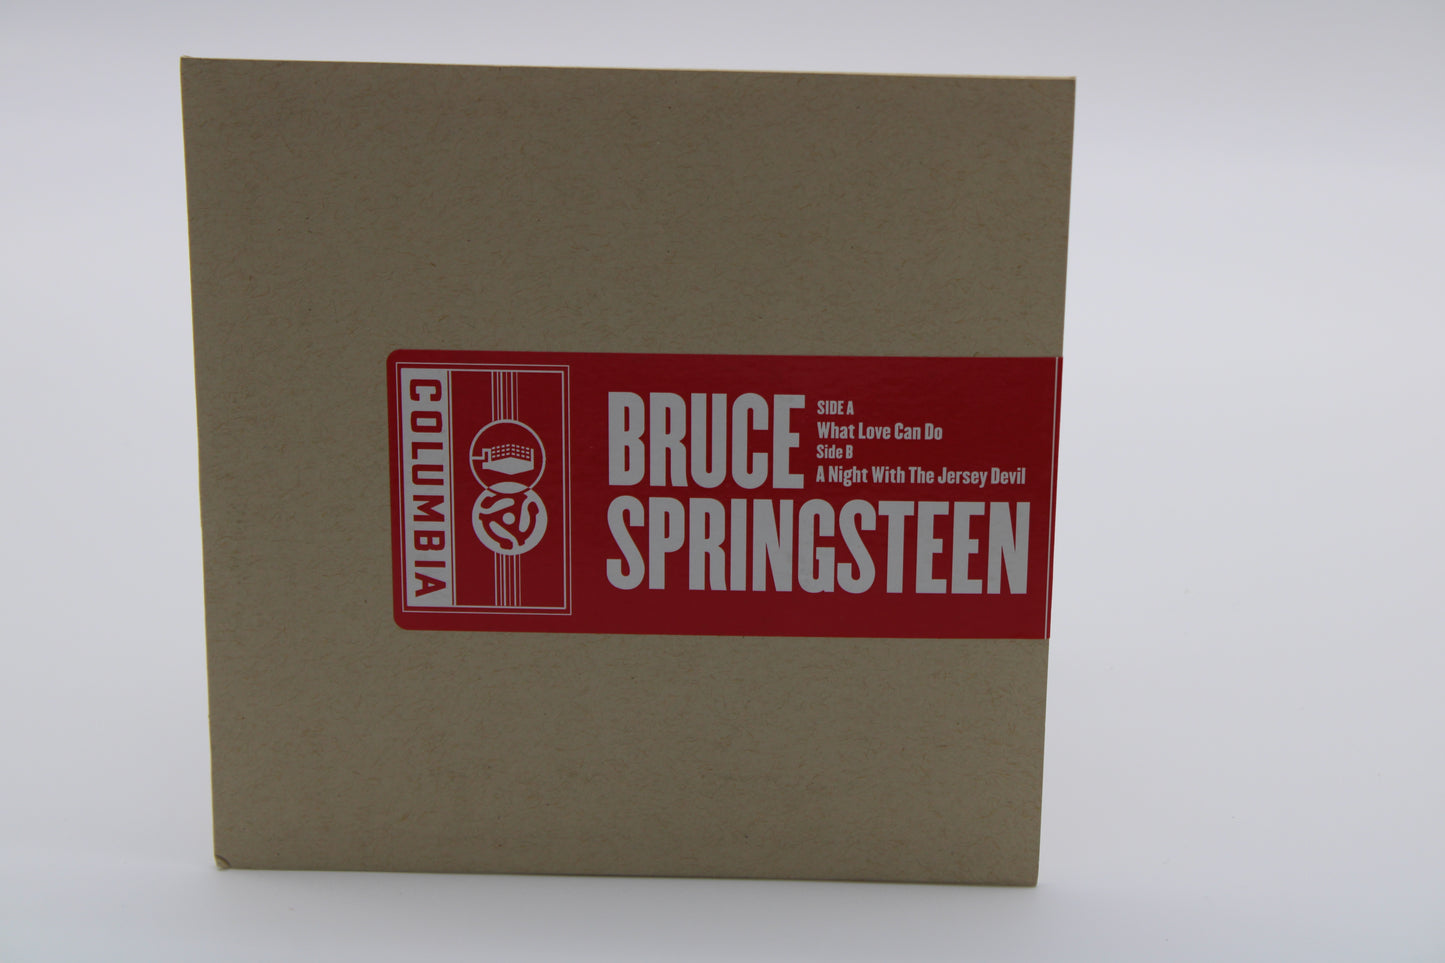 Bruce Springsteen SEALED What Love Can Do - RSD 7" on Vinyl - Sealed